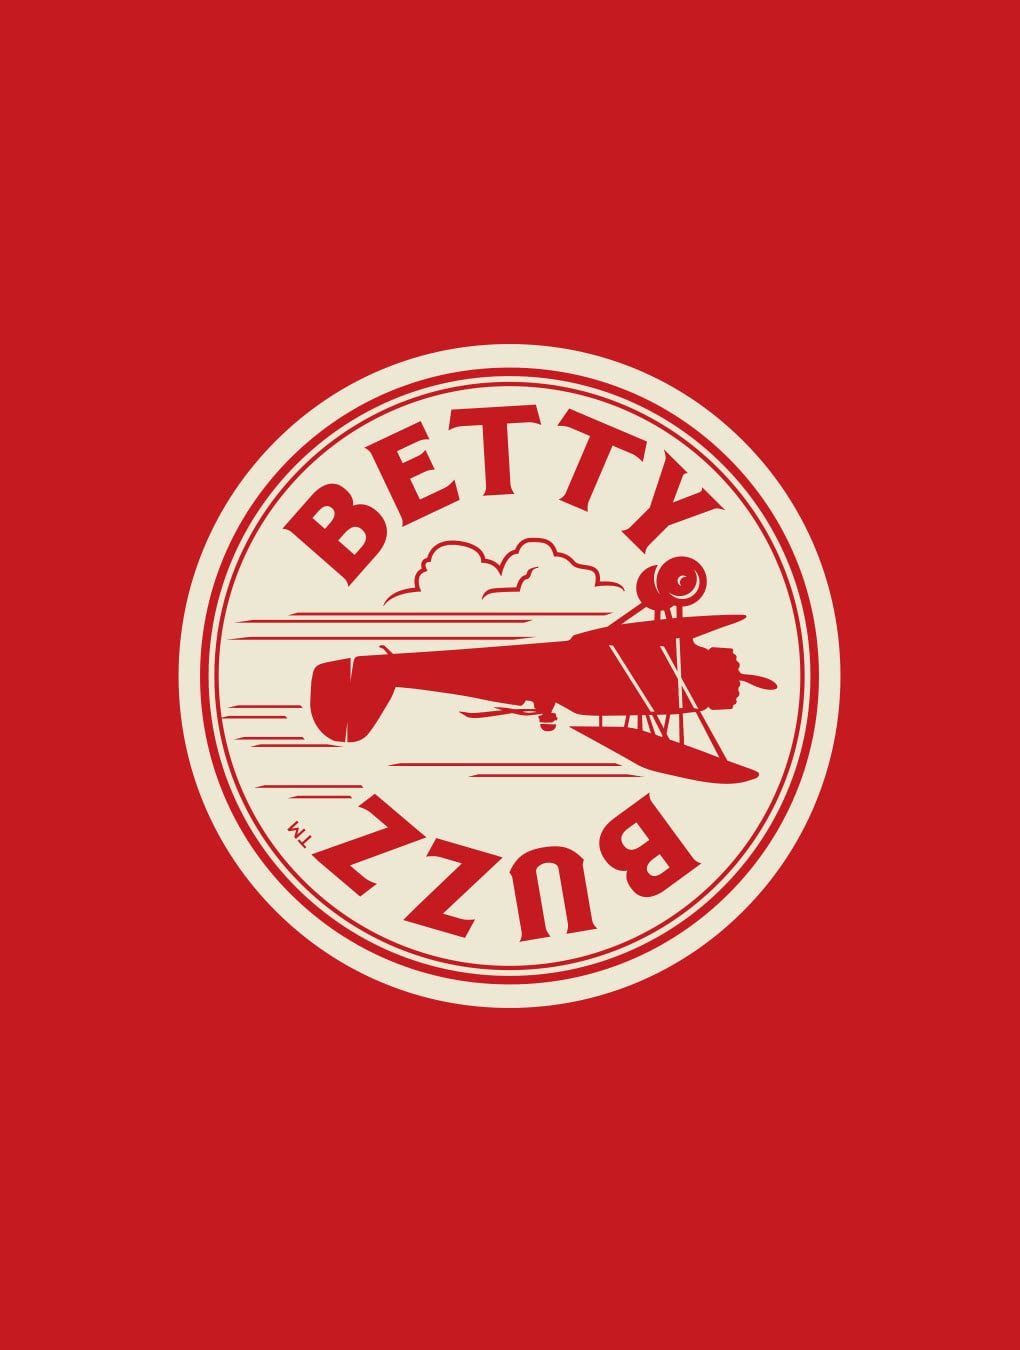 Betty Buzz logo design on red background